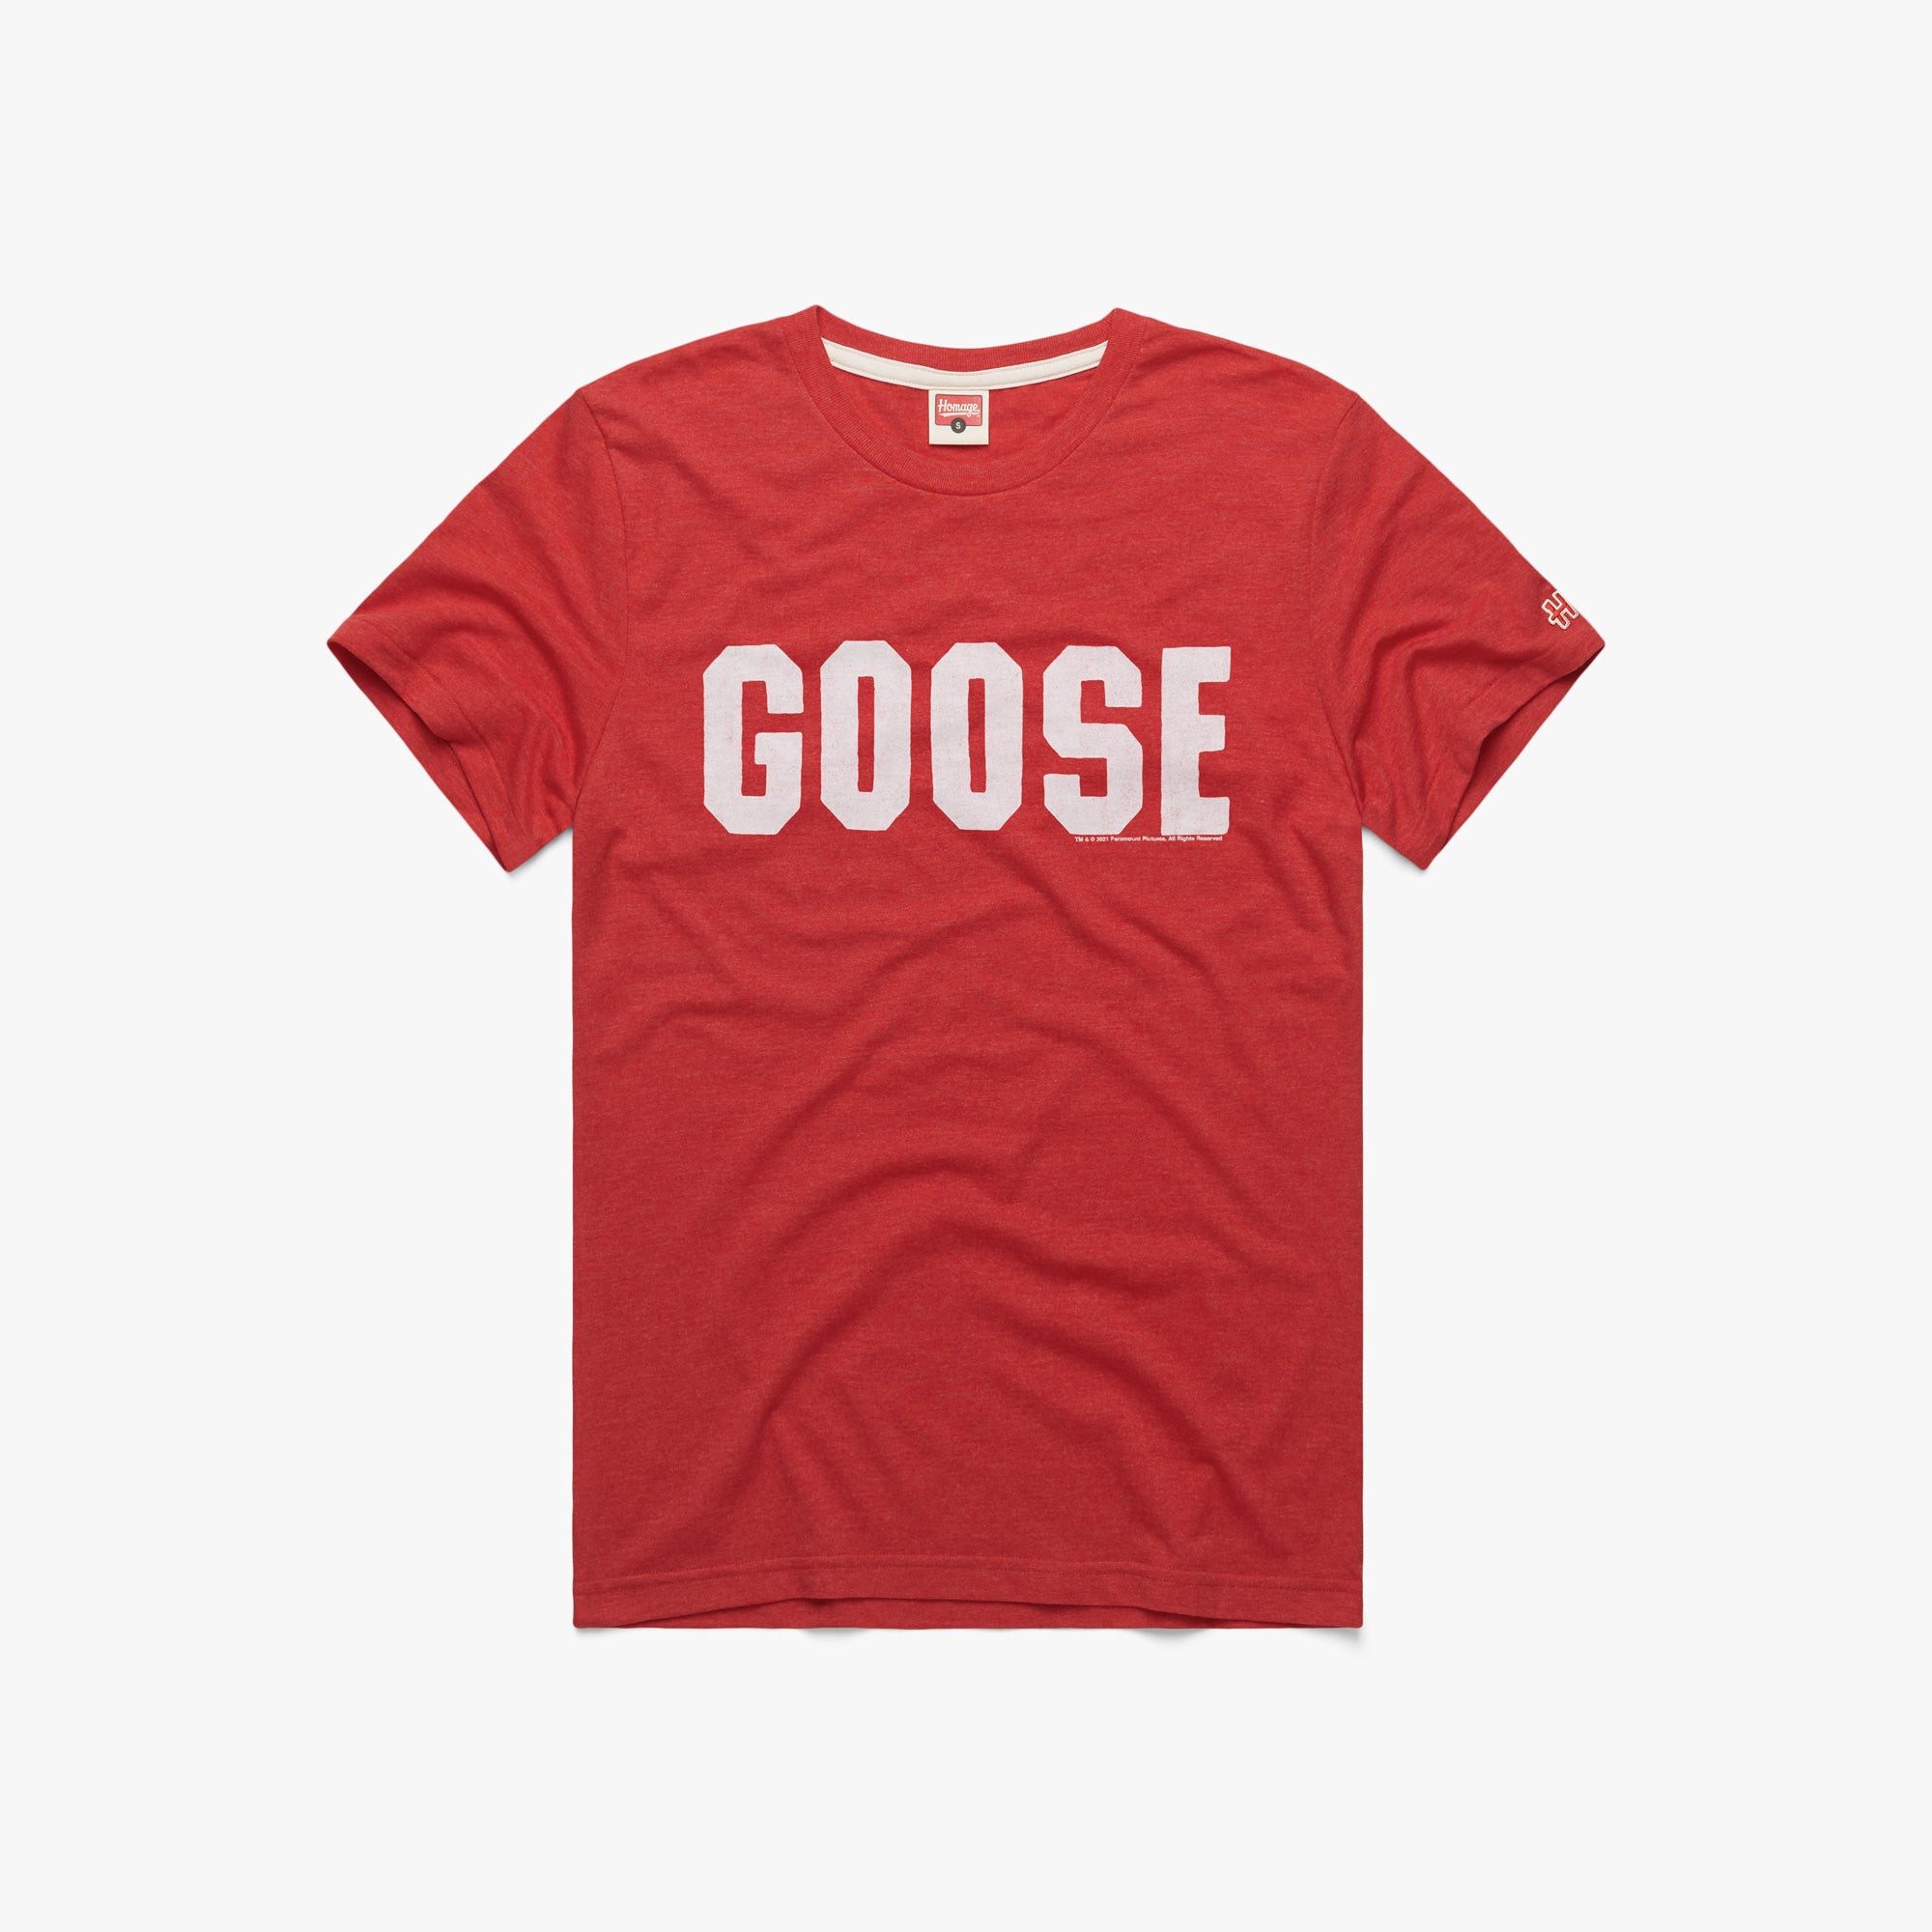 Top Gun Goose T-Shirt from Homage. | Red | Vintage Apparel from Homage.